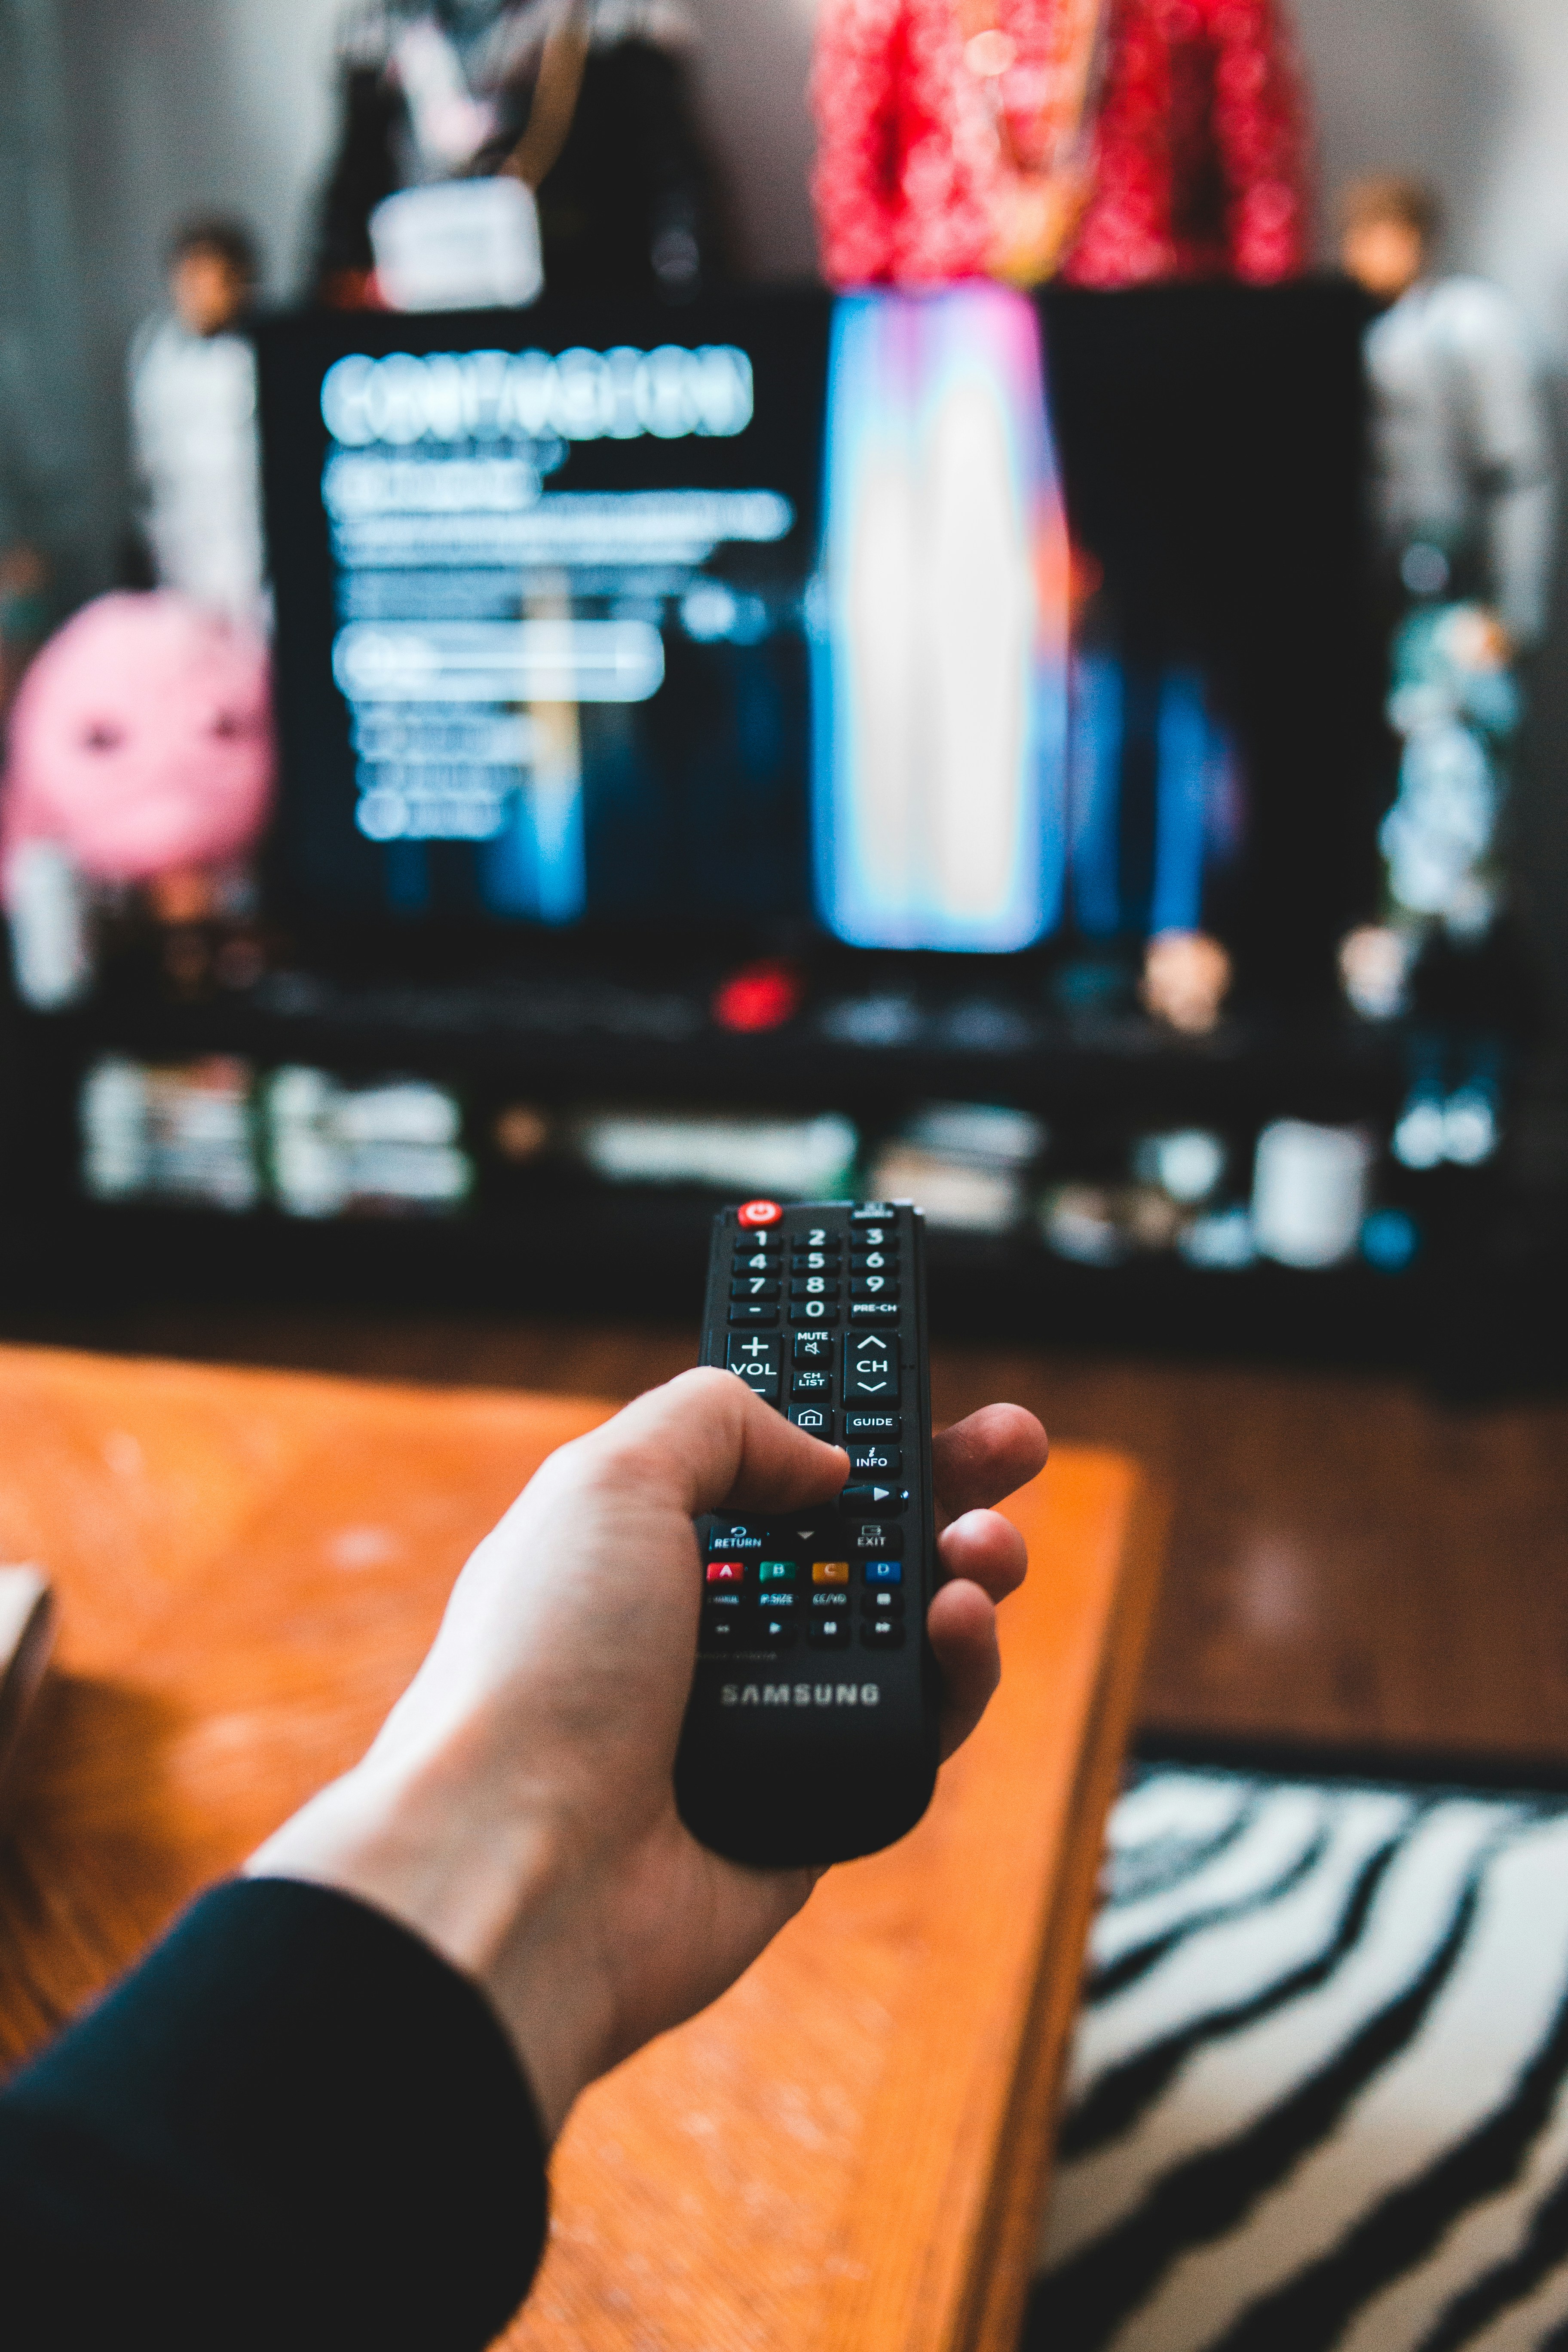 Hand holding remote control with TV in the background.